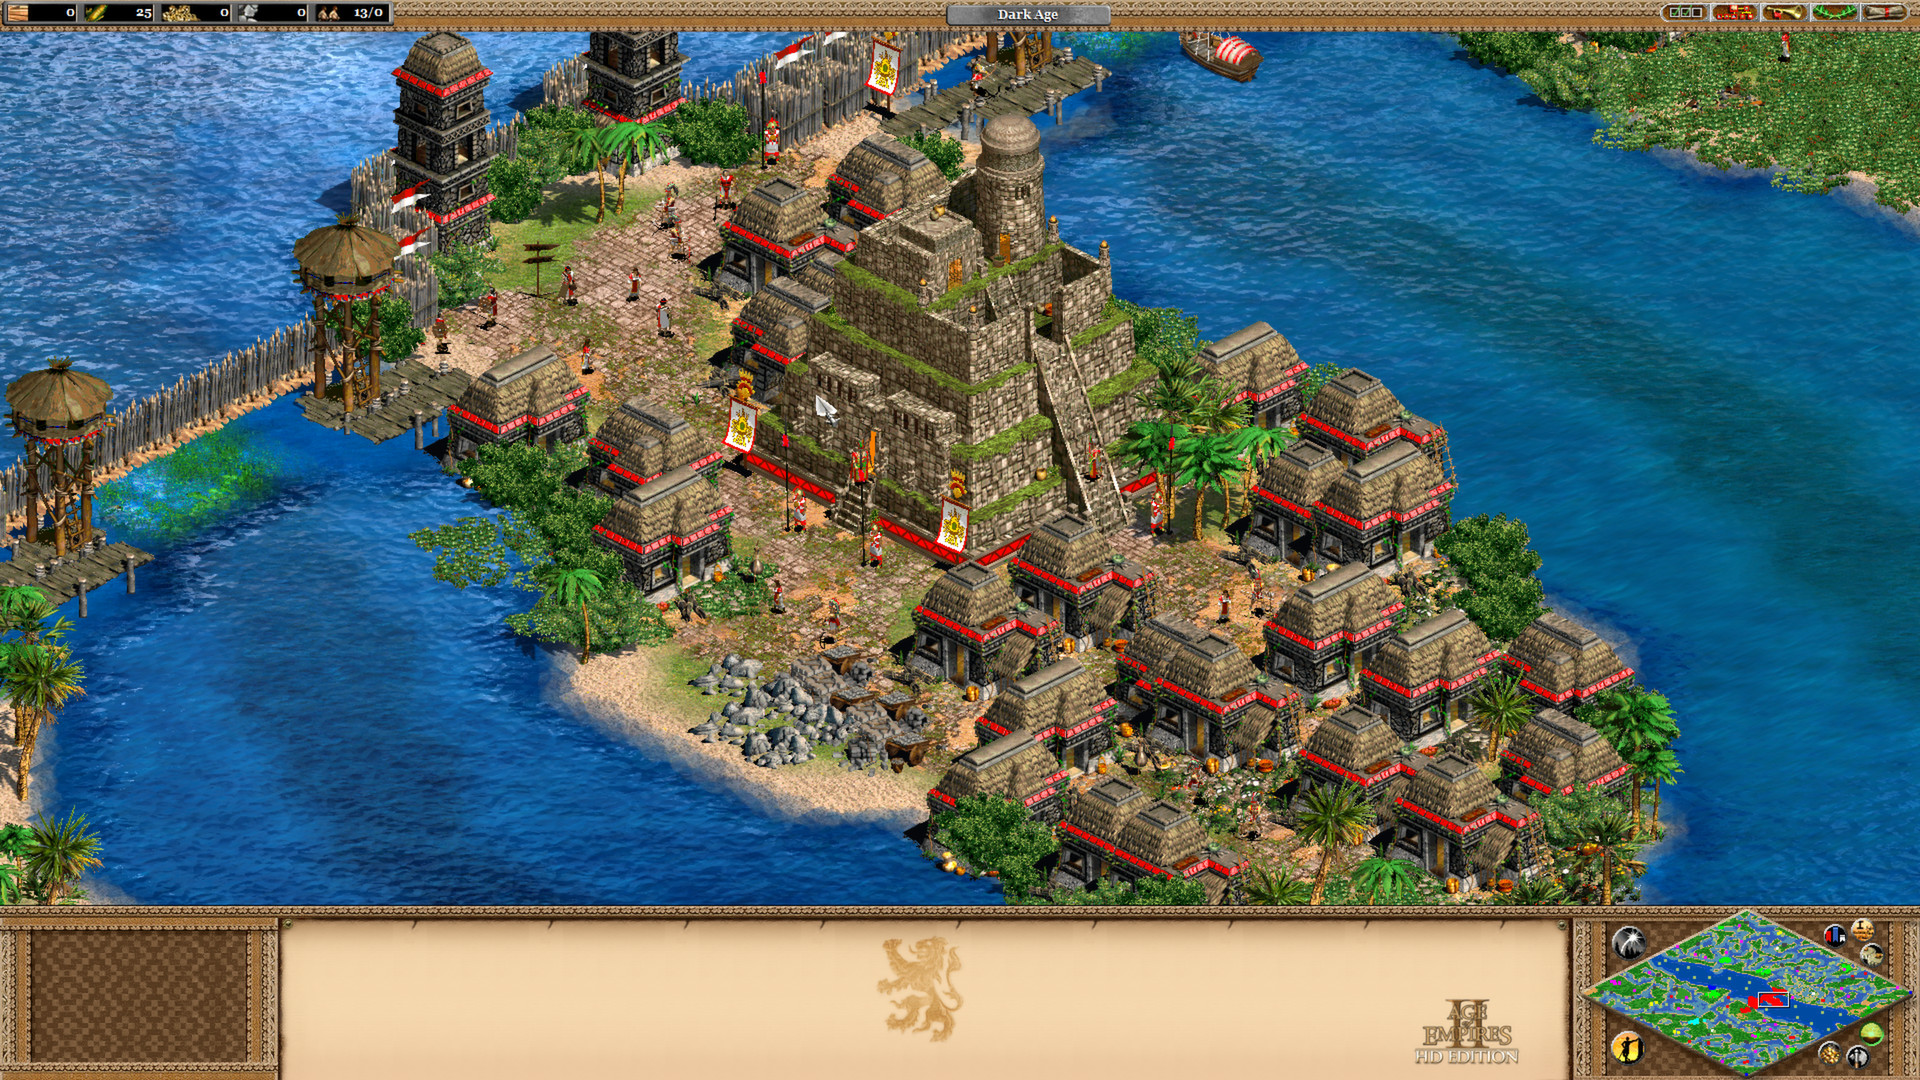 age of empires 2 setup.exe free download